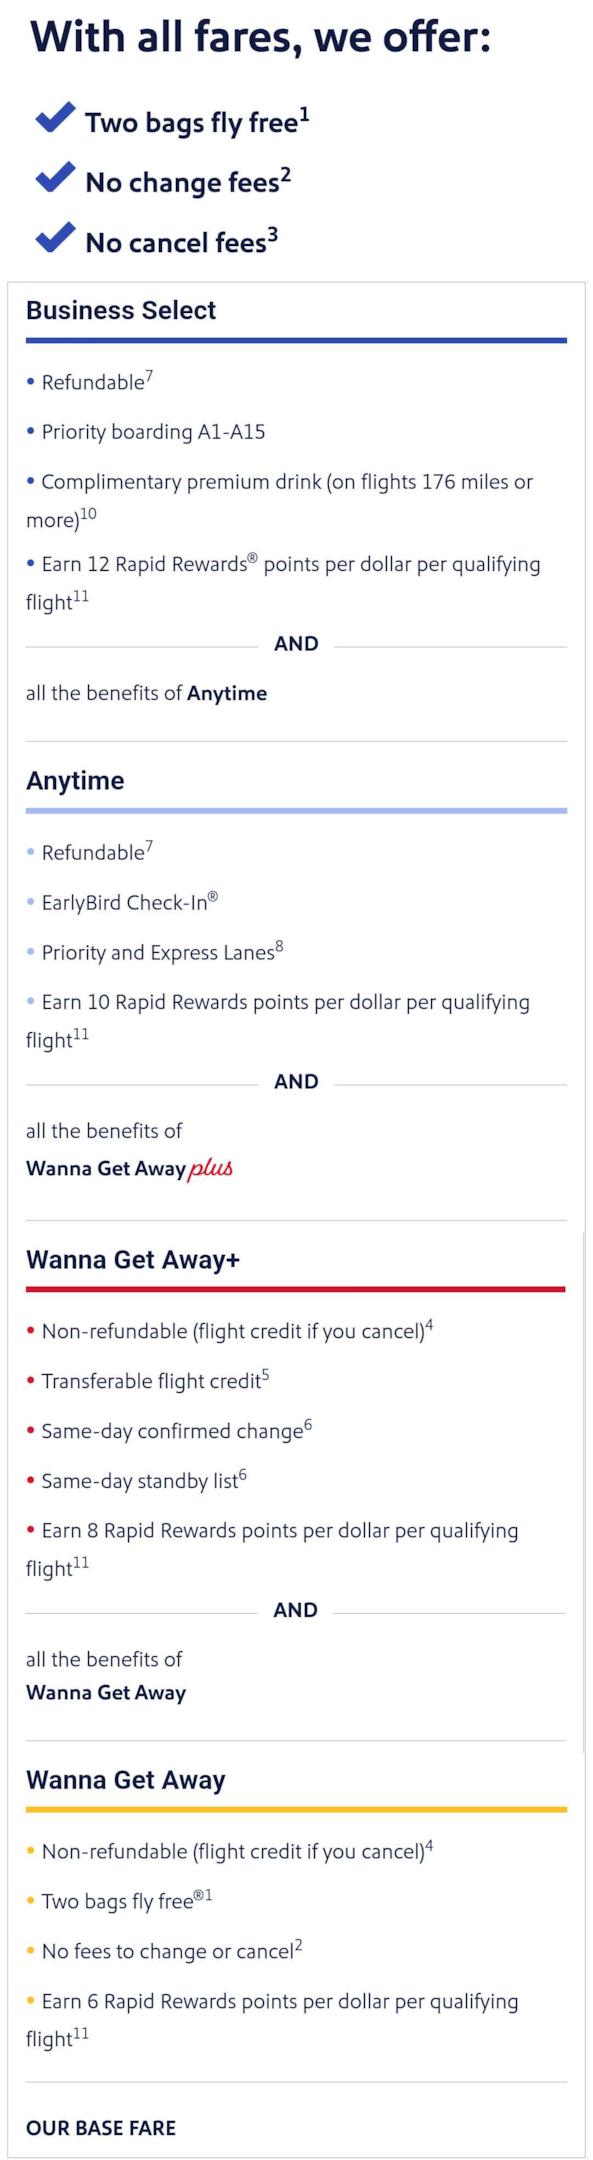 Southwest Pricing Strategy